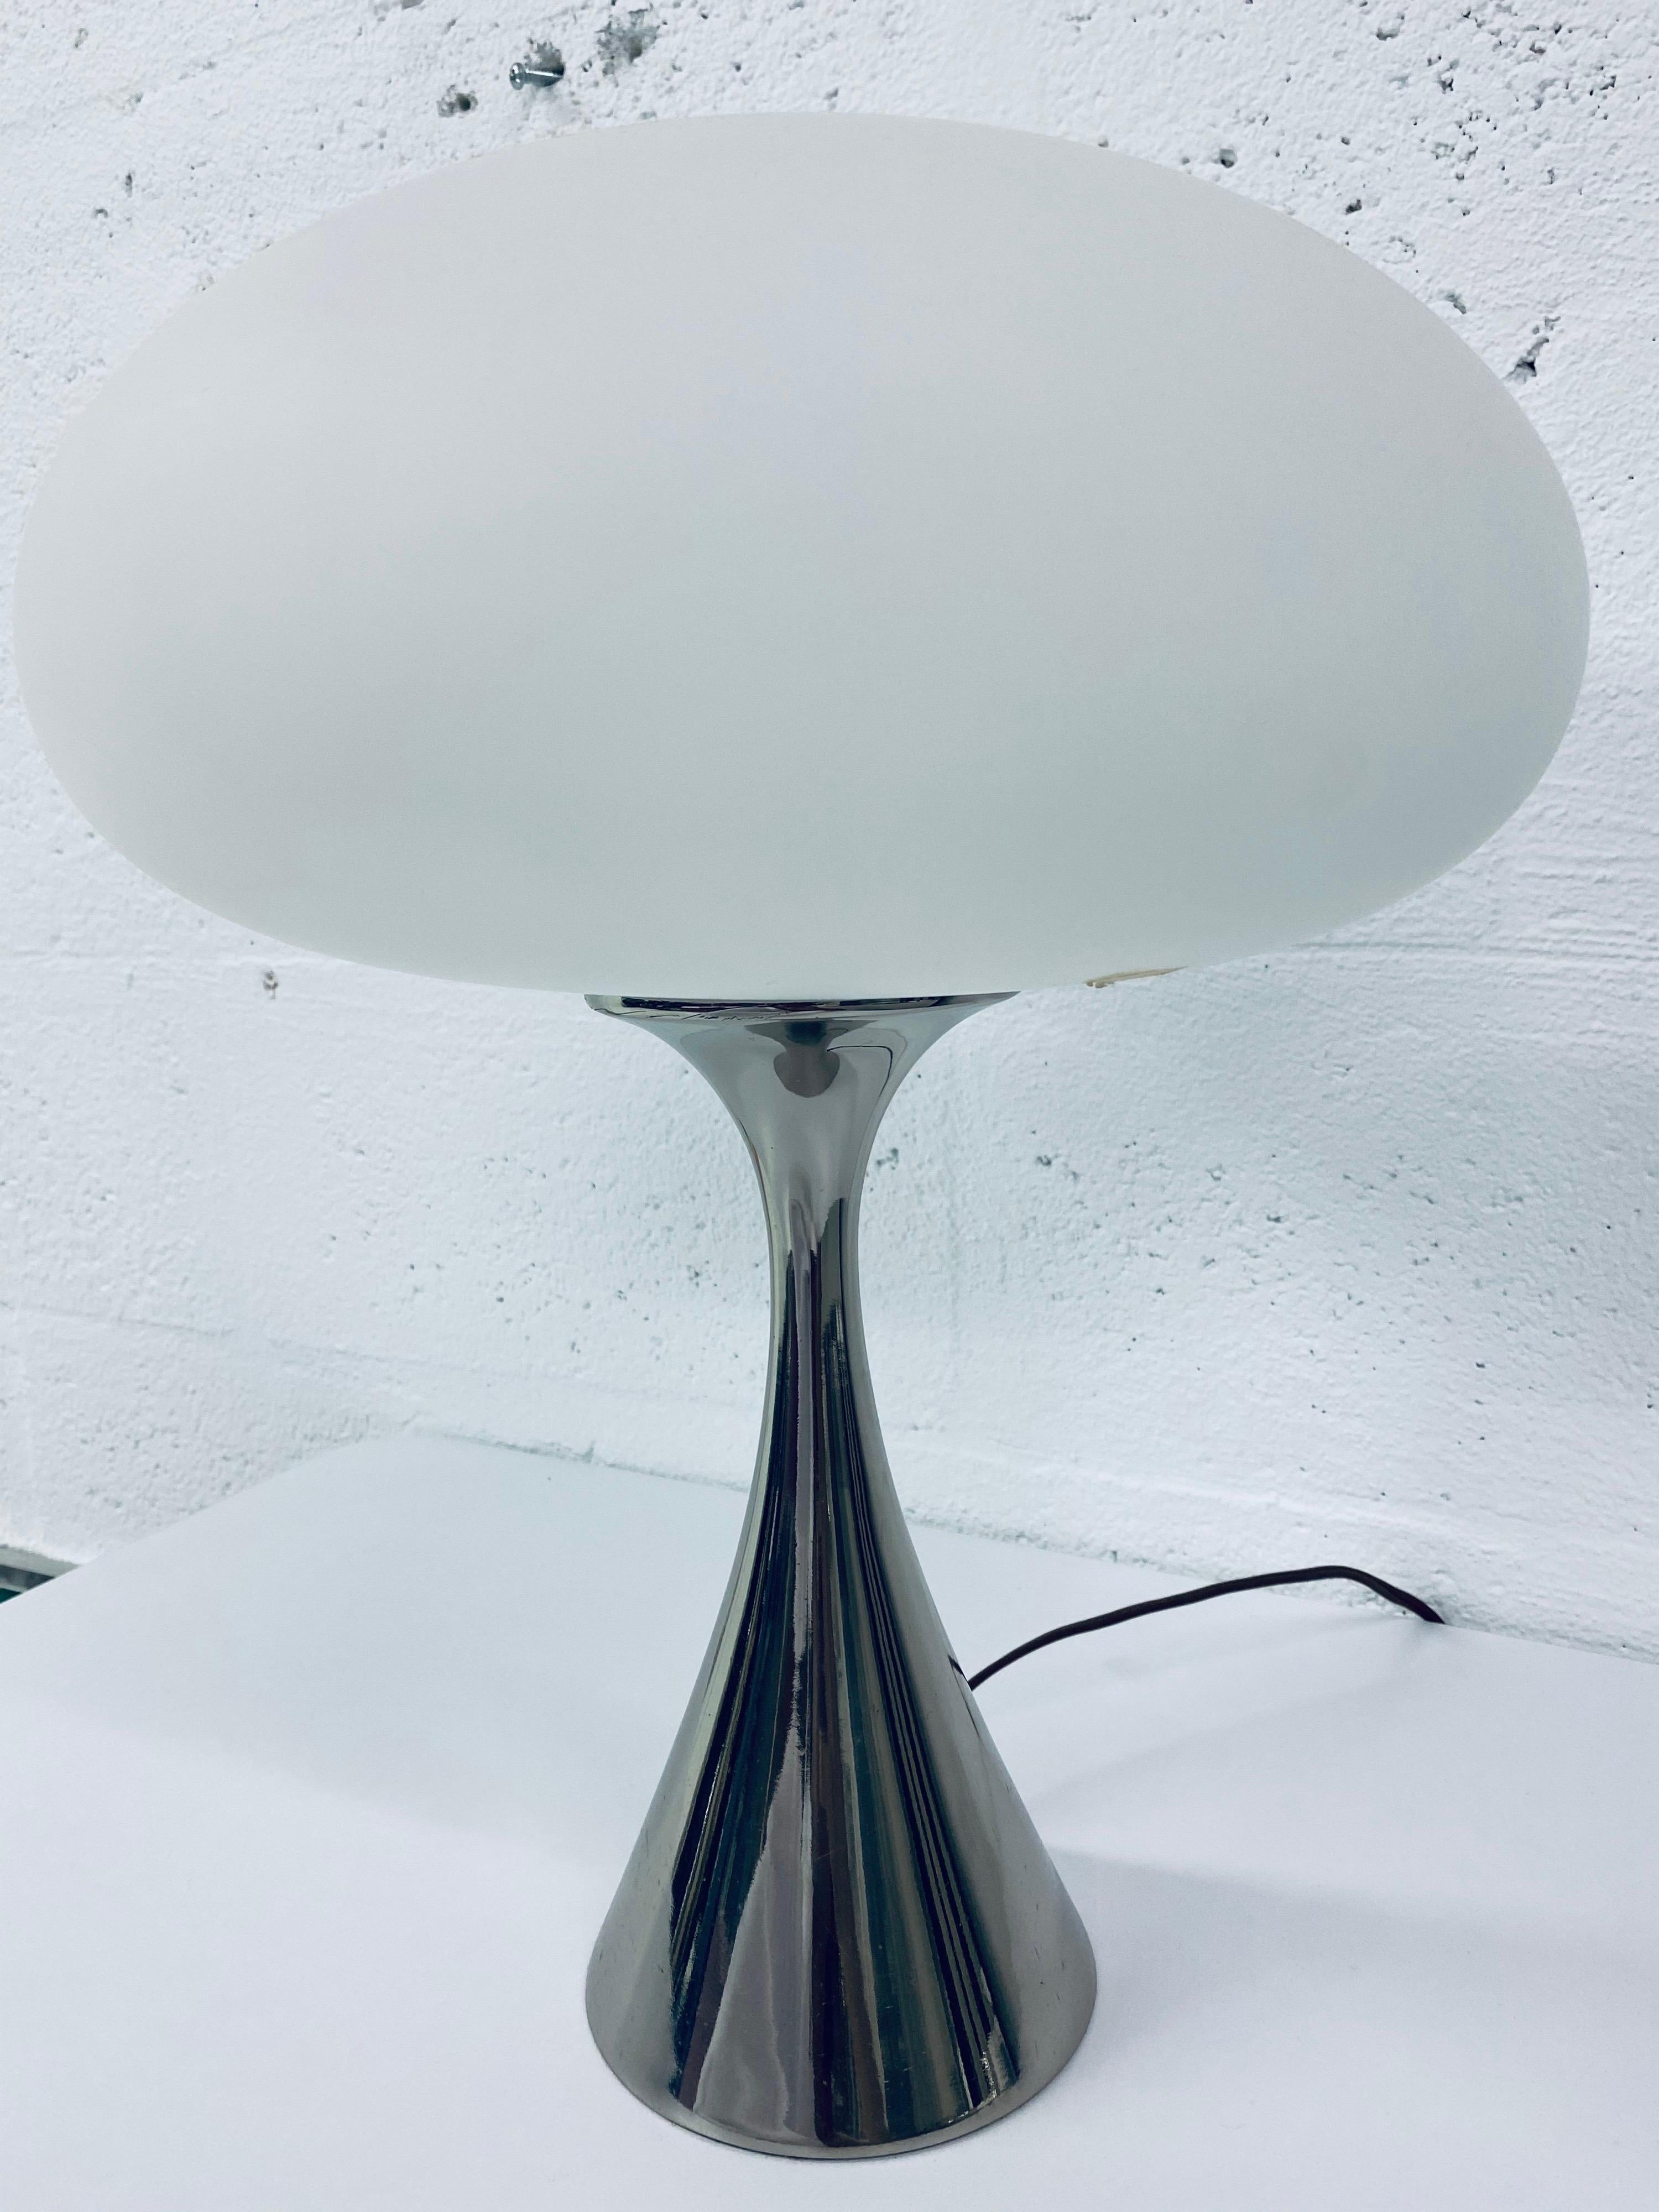 Mushroom lamp with polished chrome base and white satin glass shade designed by Bill Curry for Laurel.